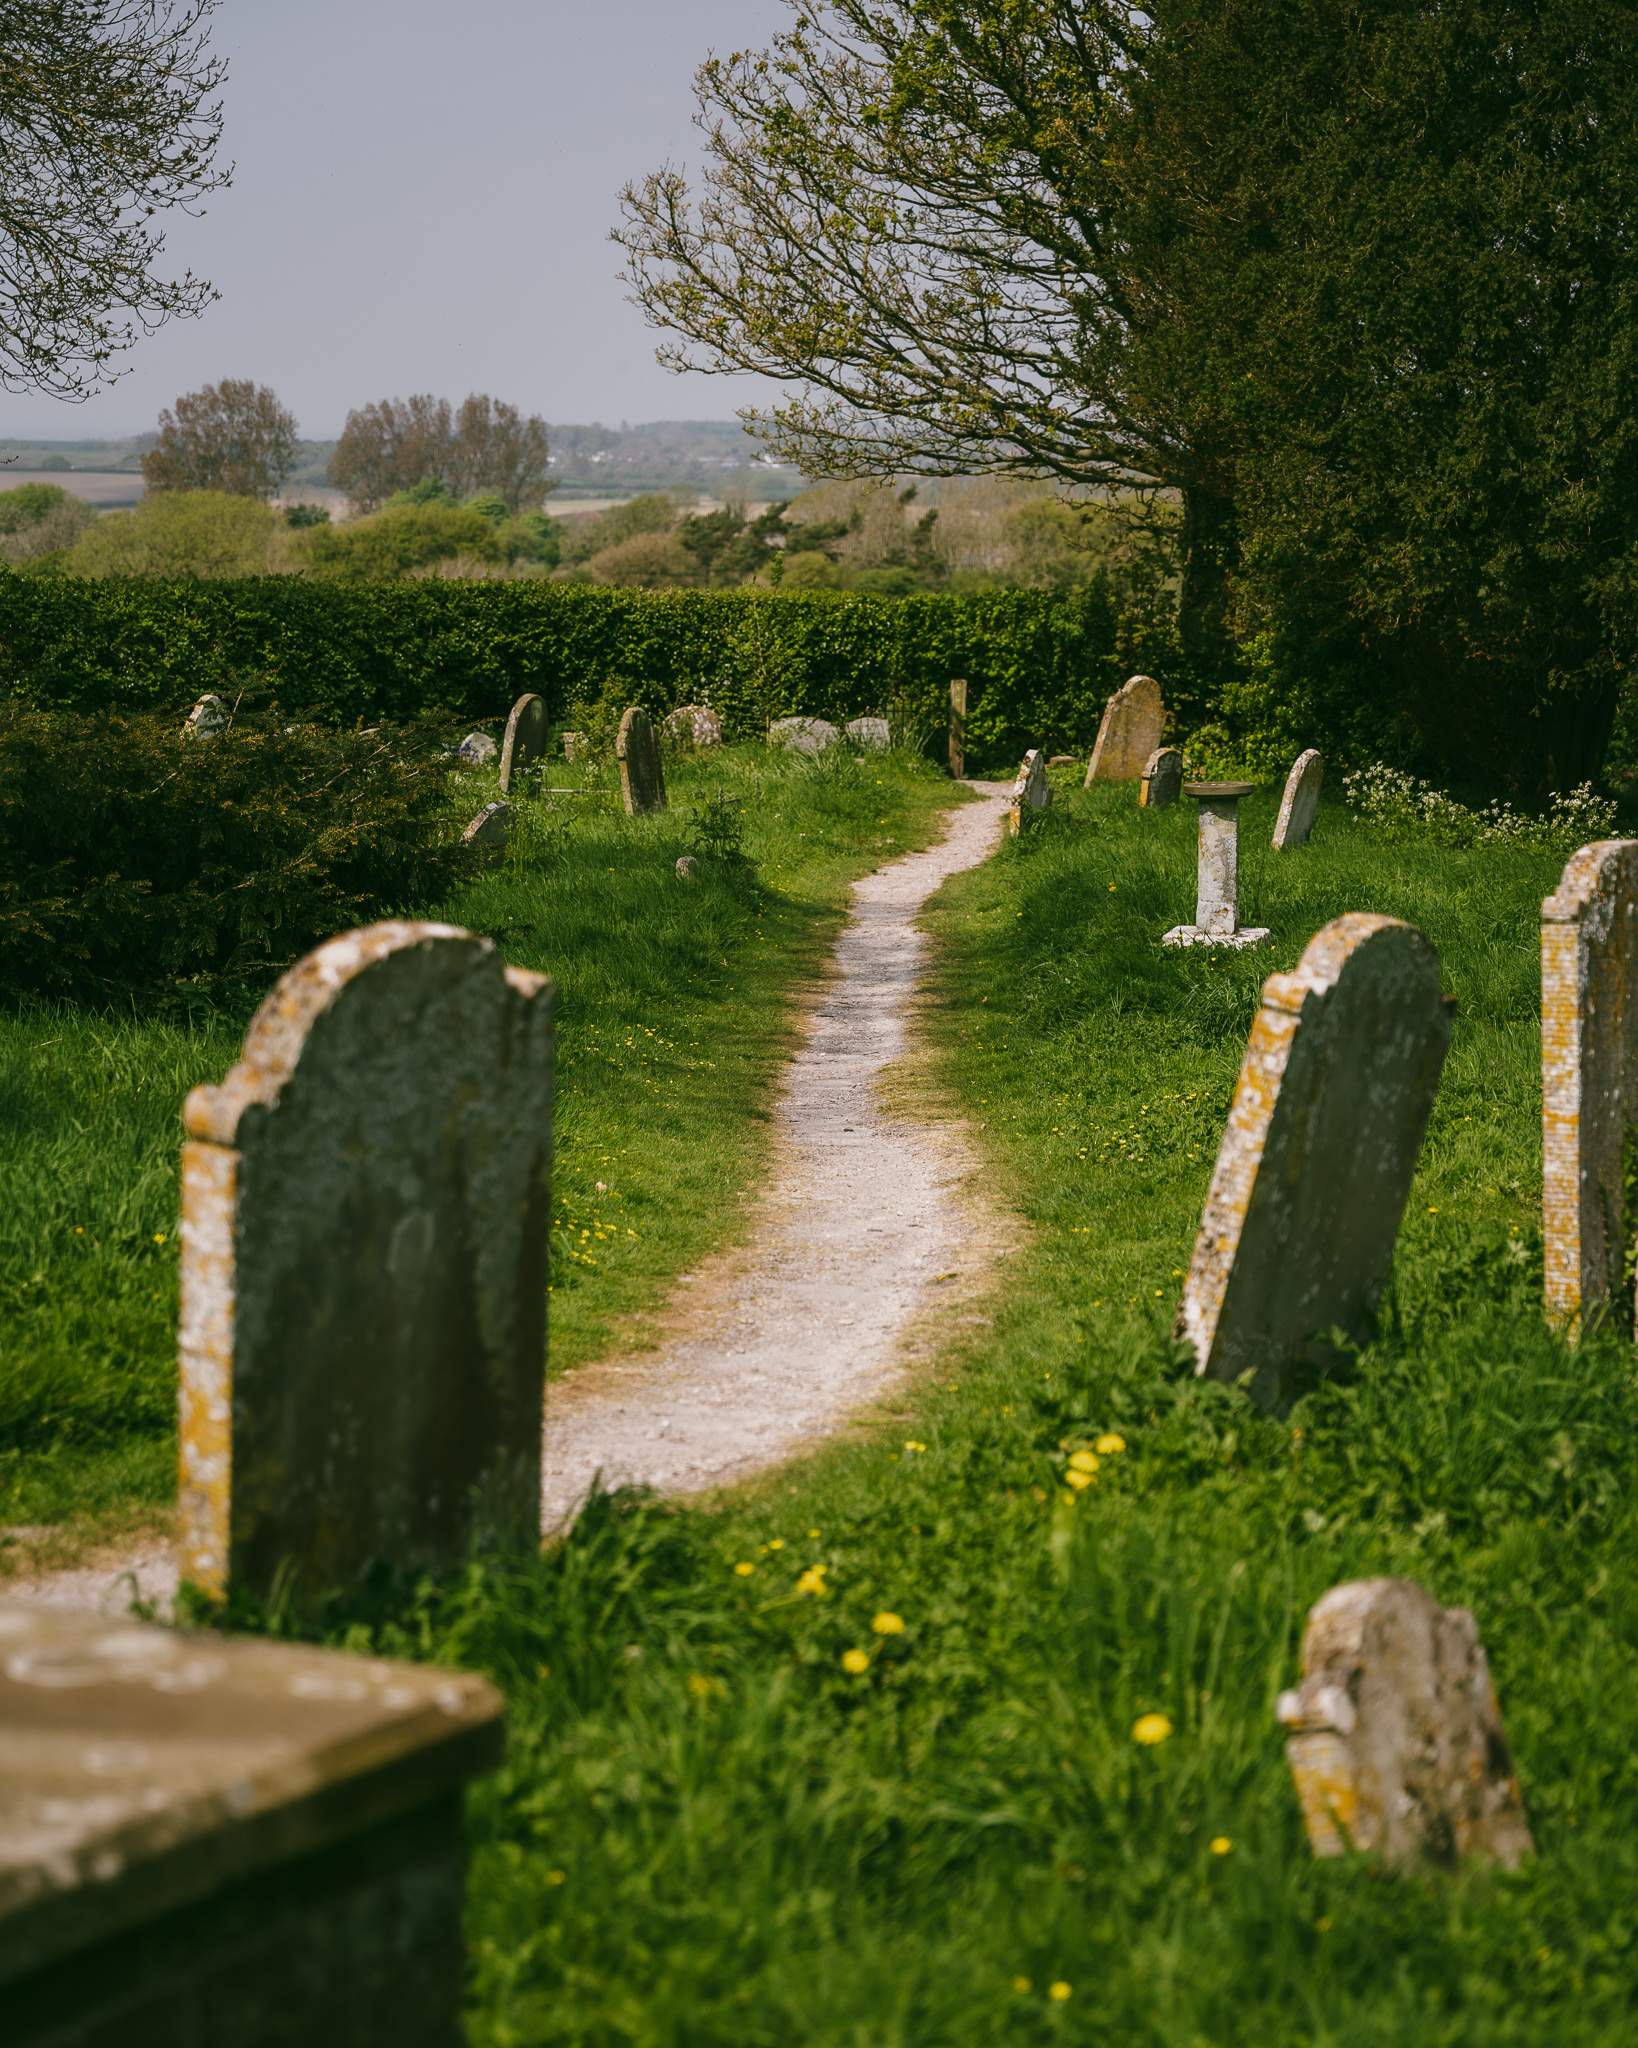 The churchyard of St. Mary and St. Peter's Church, Wilmington, East Sussex, England, UK